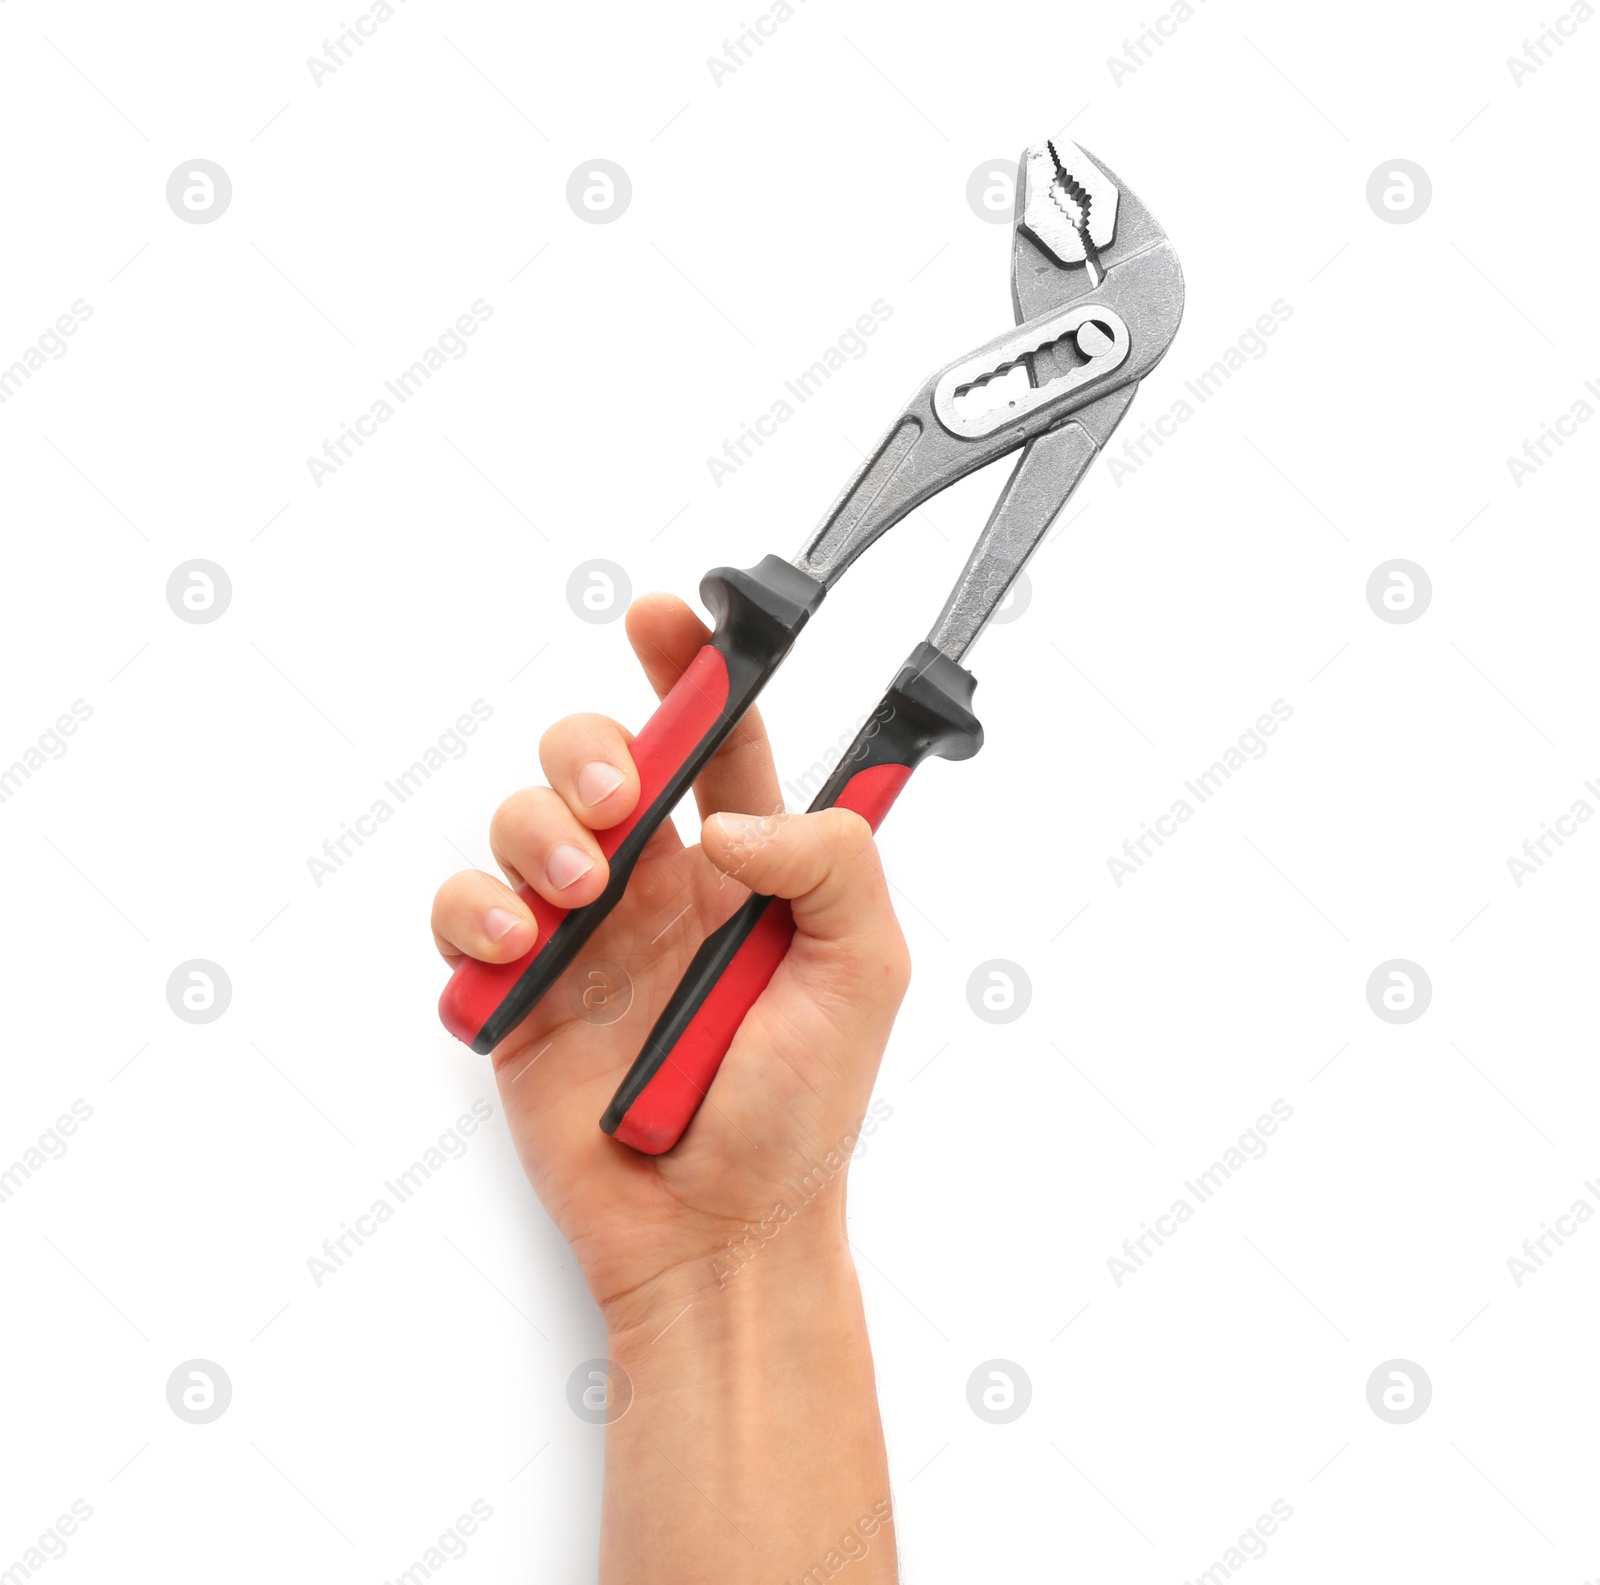 Photo of Plumber holding rib joint pliers on white background, closeup